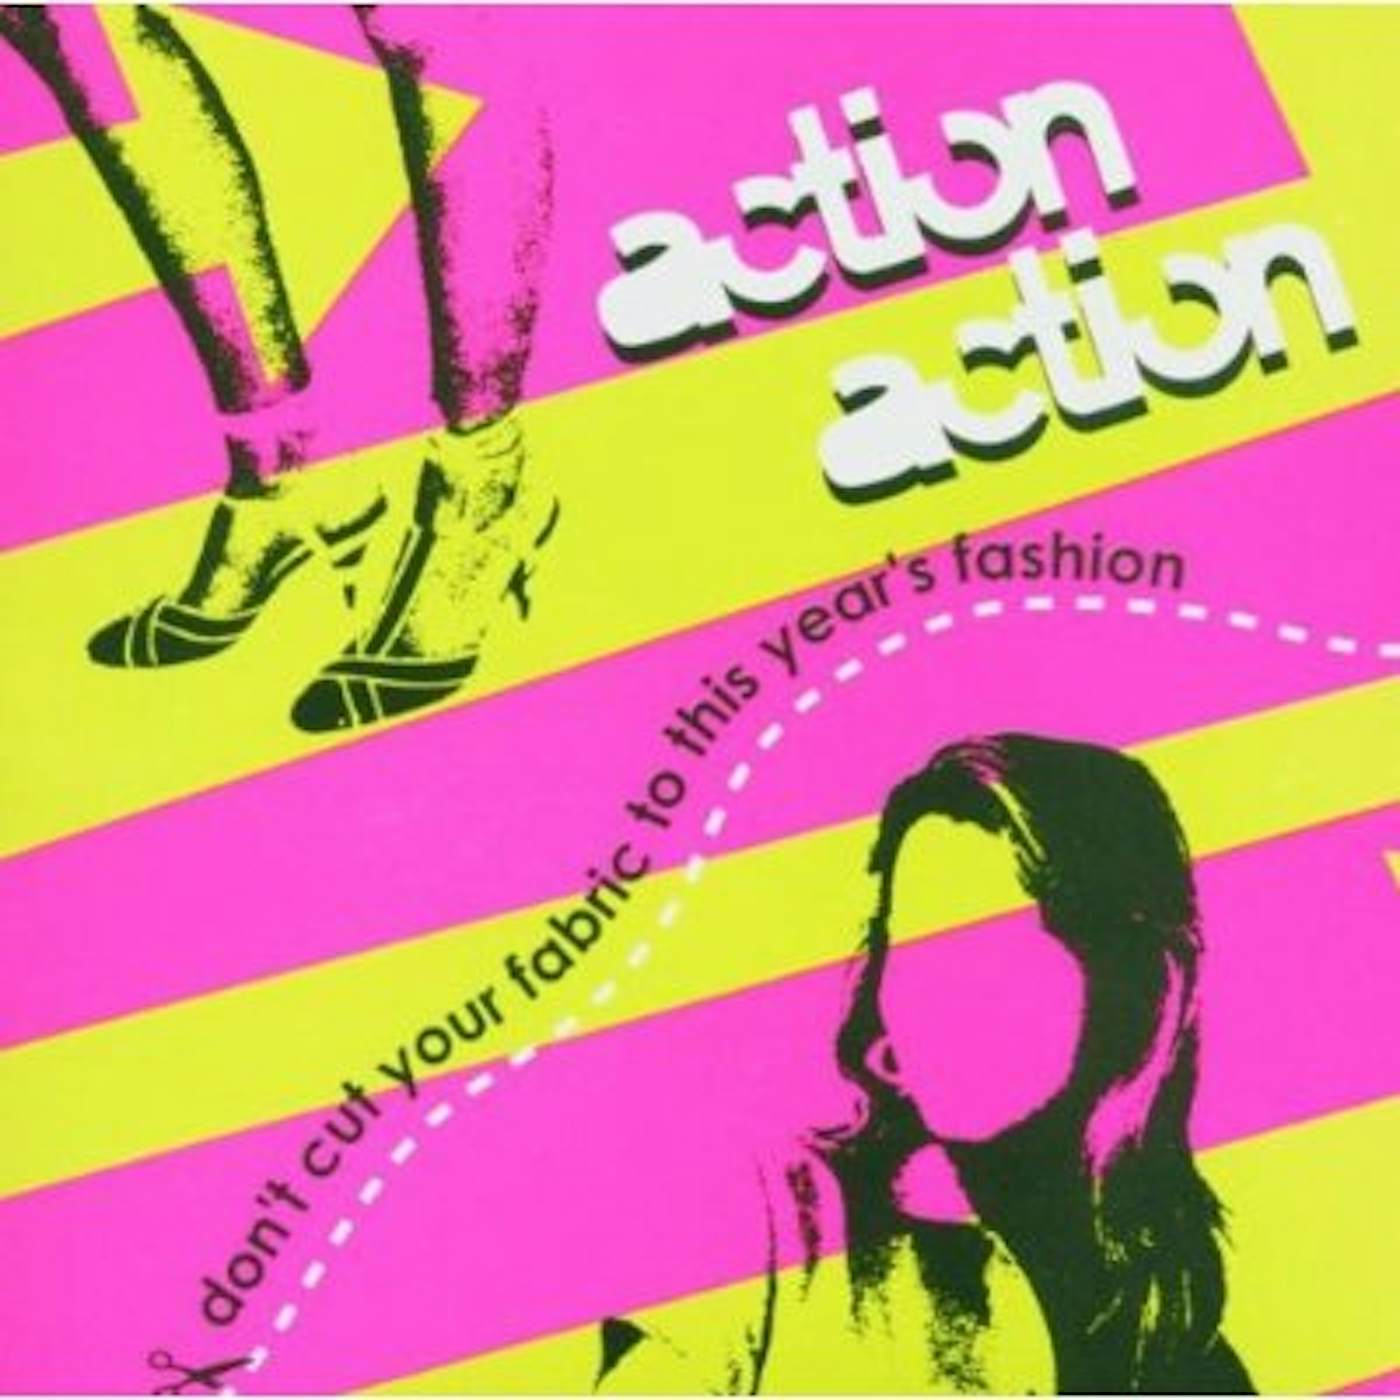 Action Action DON'T CUT YOUR FABRIC TO THIS YEAR'S FASHION CD